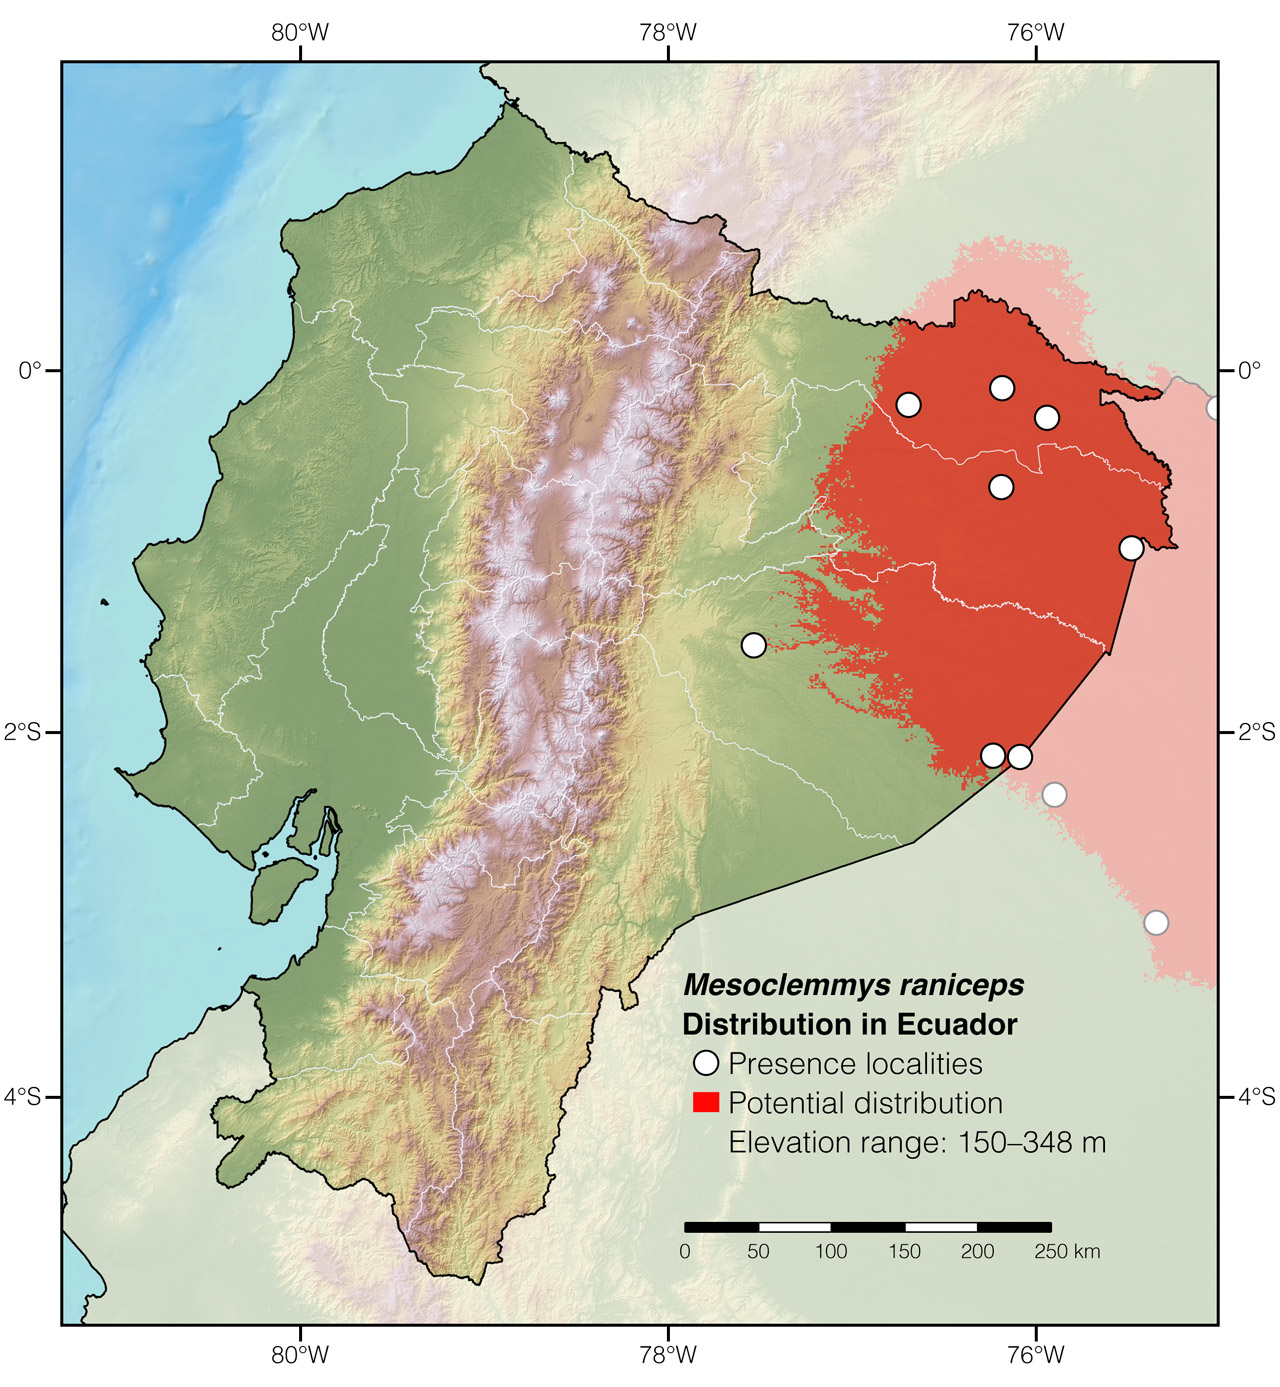 Distribution of Mesoclemmys raniceps in Ecuador